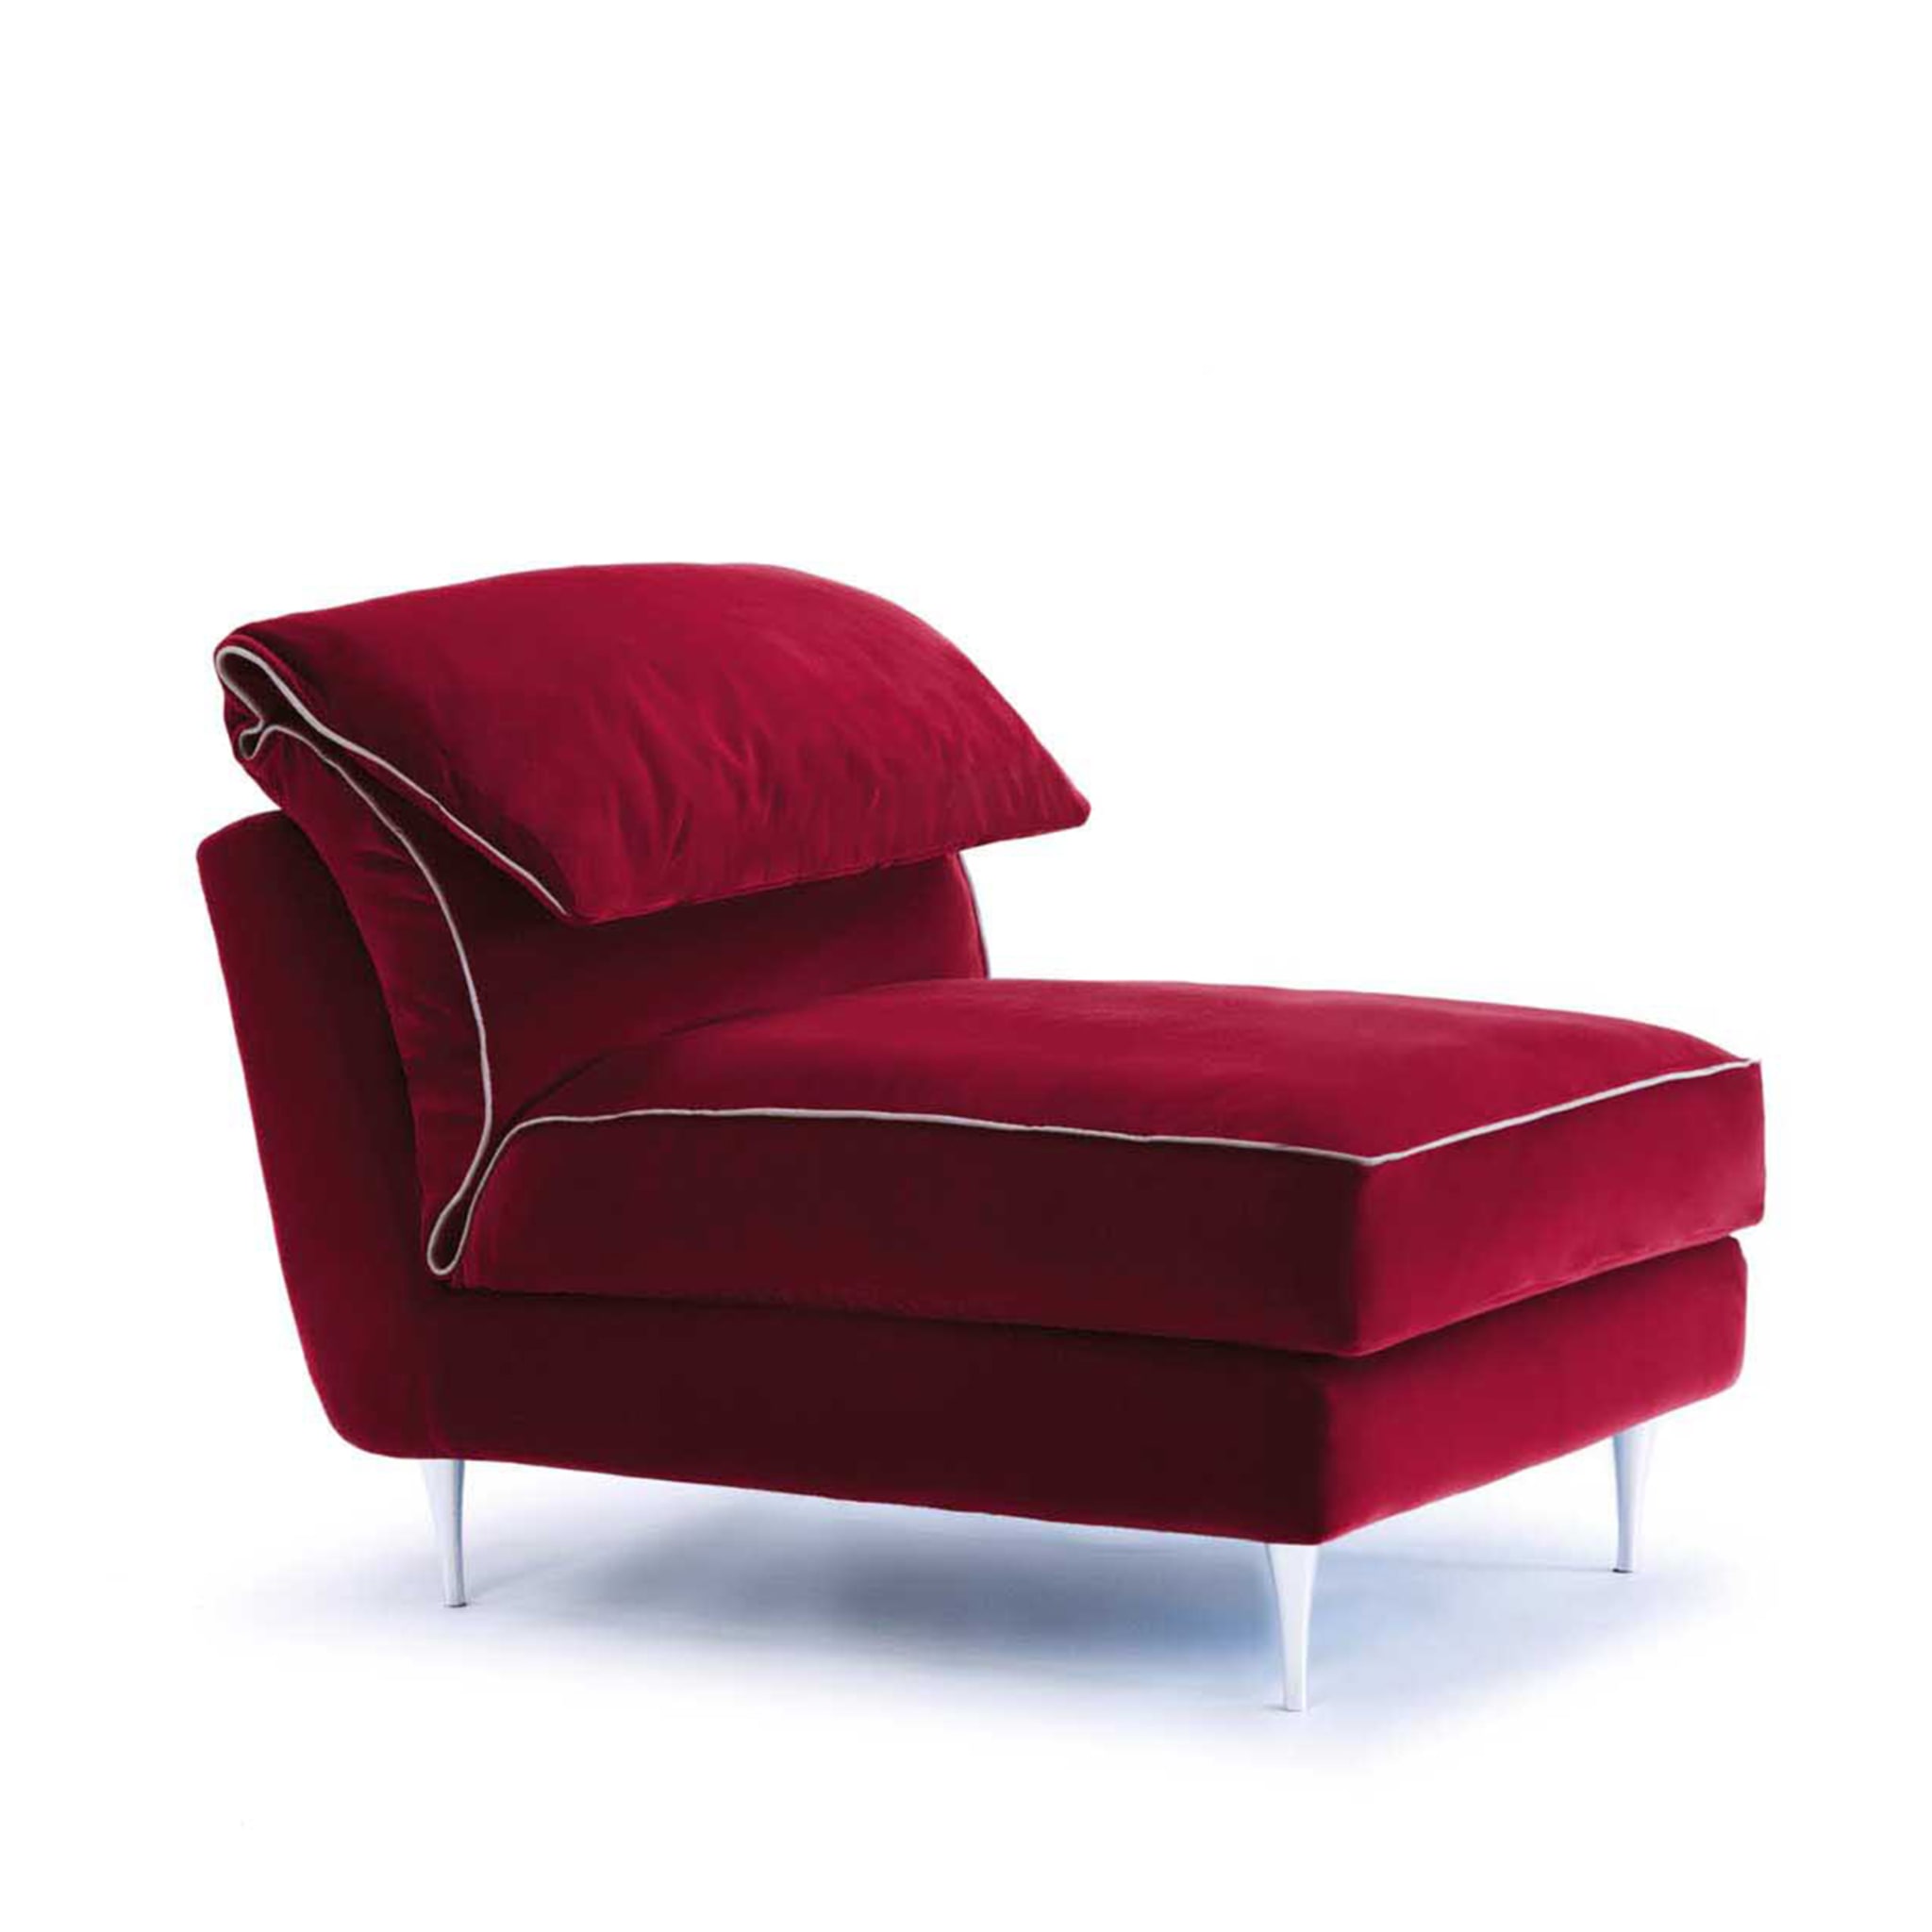 Casquet Mini in Passion Red Velvet Daybed - Alternative view 1